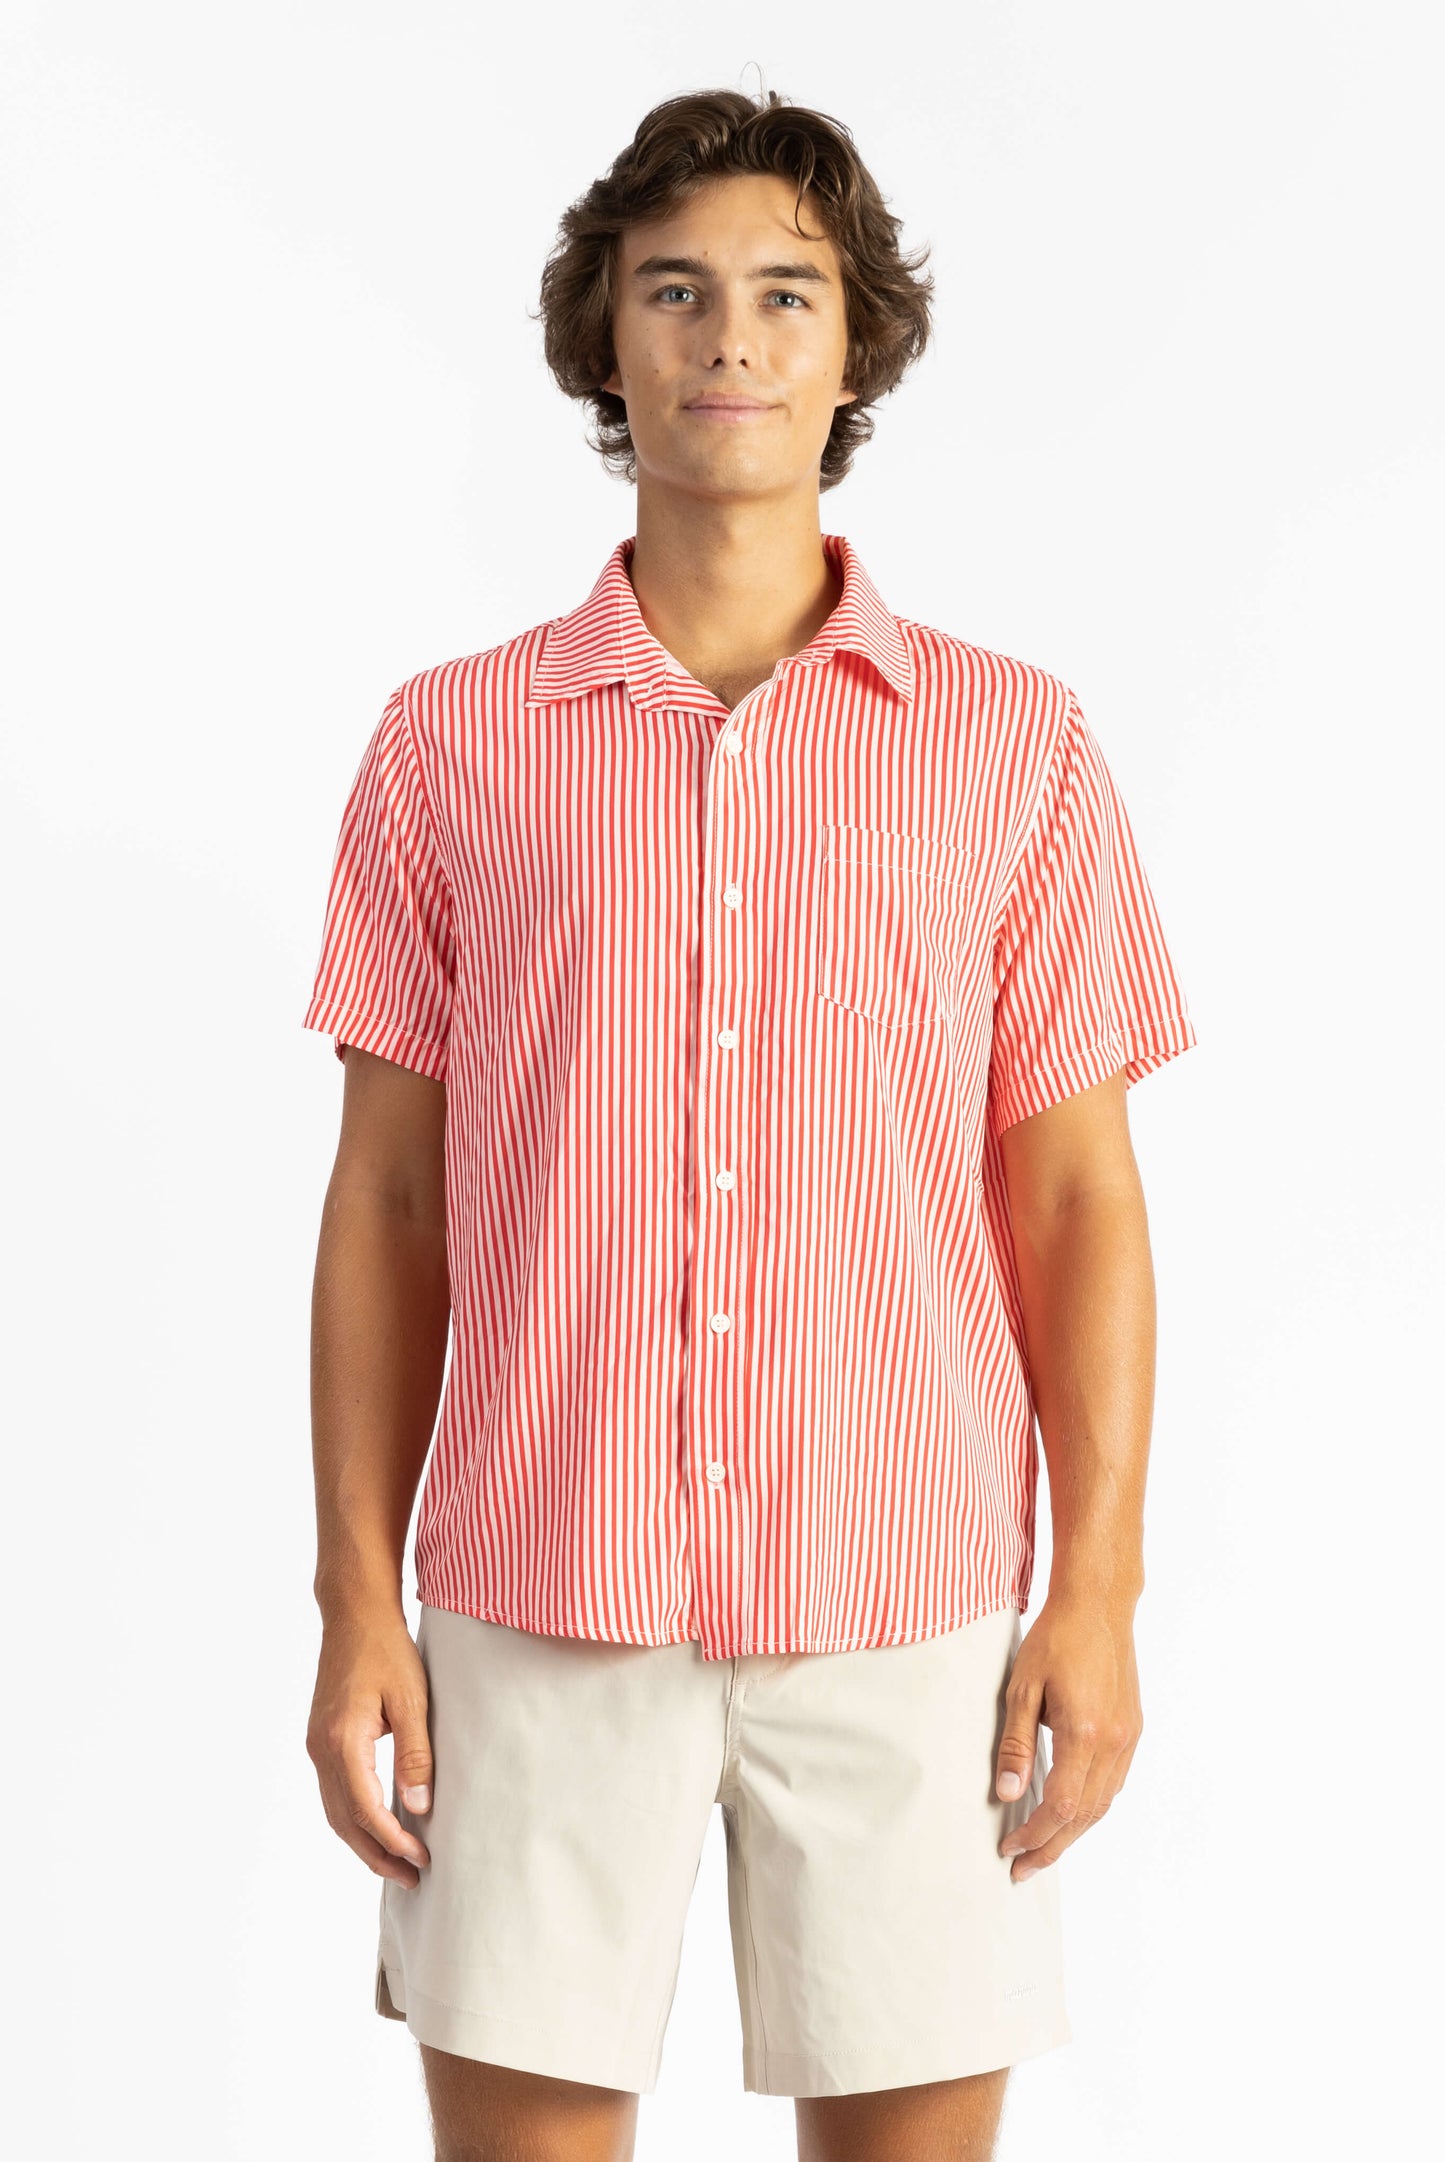 A man wearing a Red Stripes Breeze Button Up Shirt with white shorts